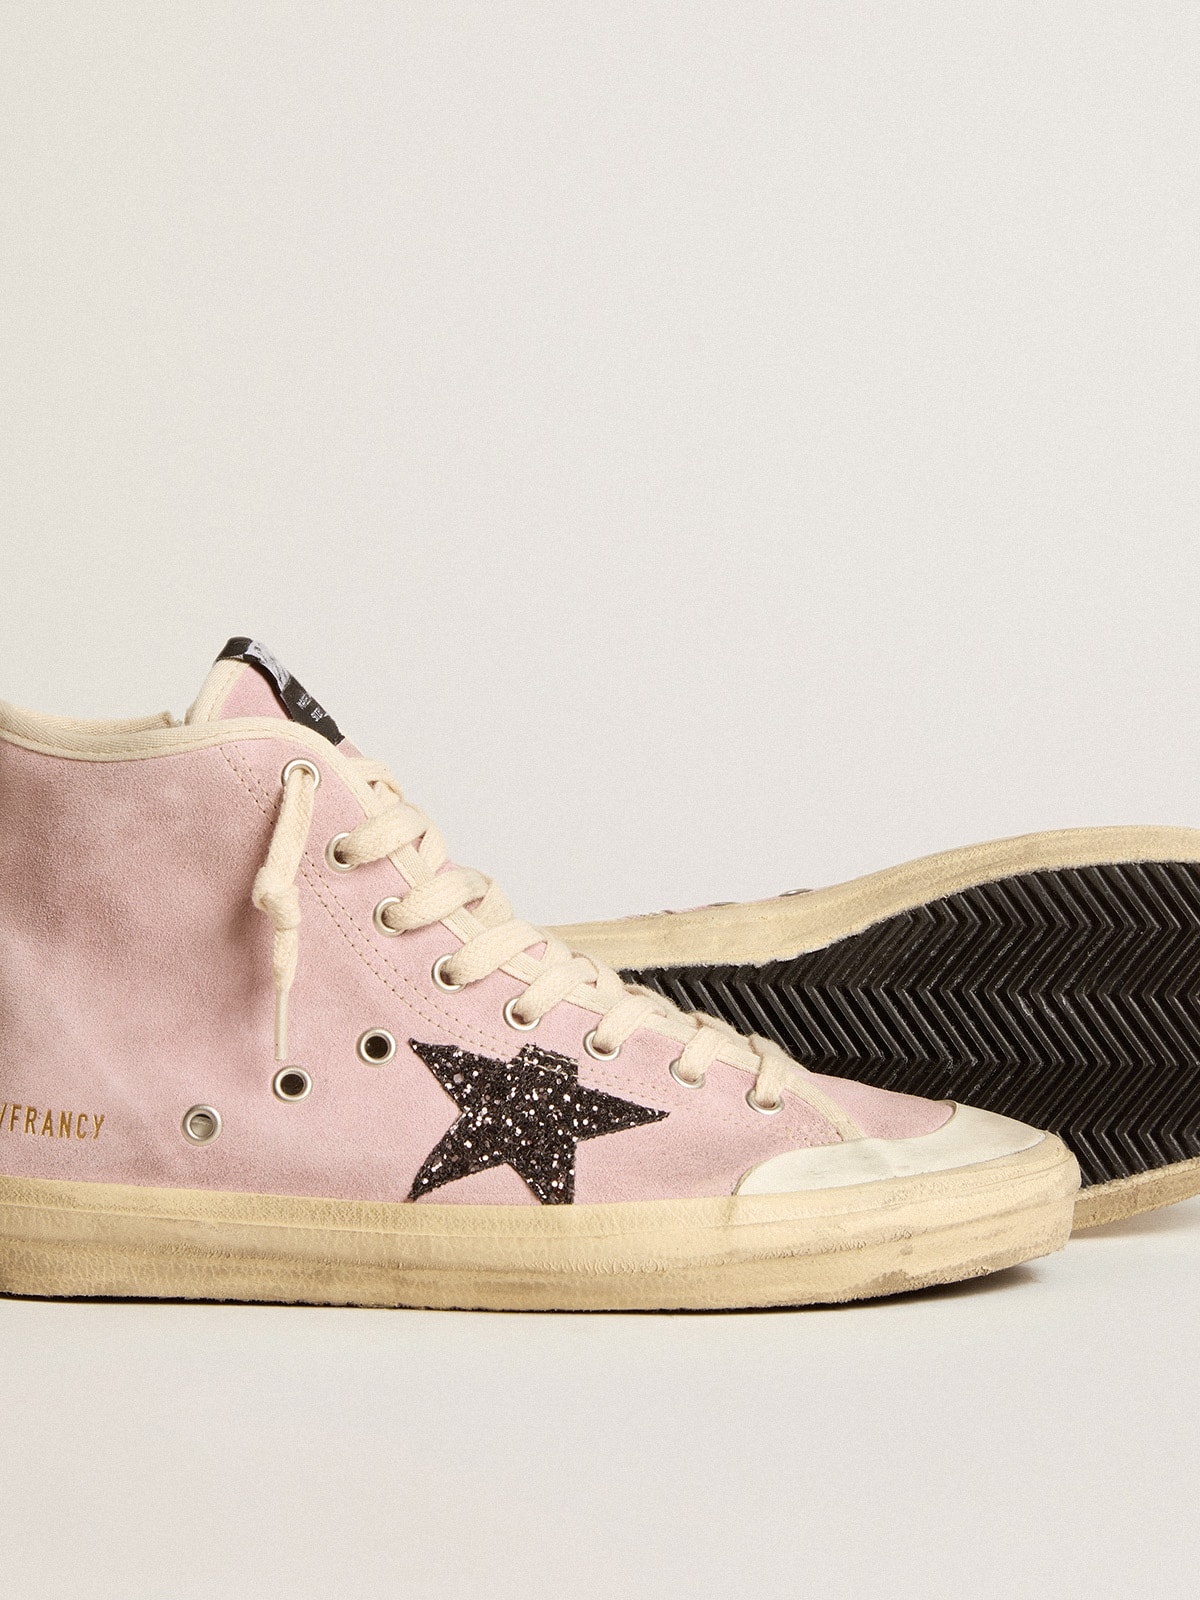 Francy Penstar in pink suede with gray glitter star - 3